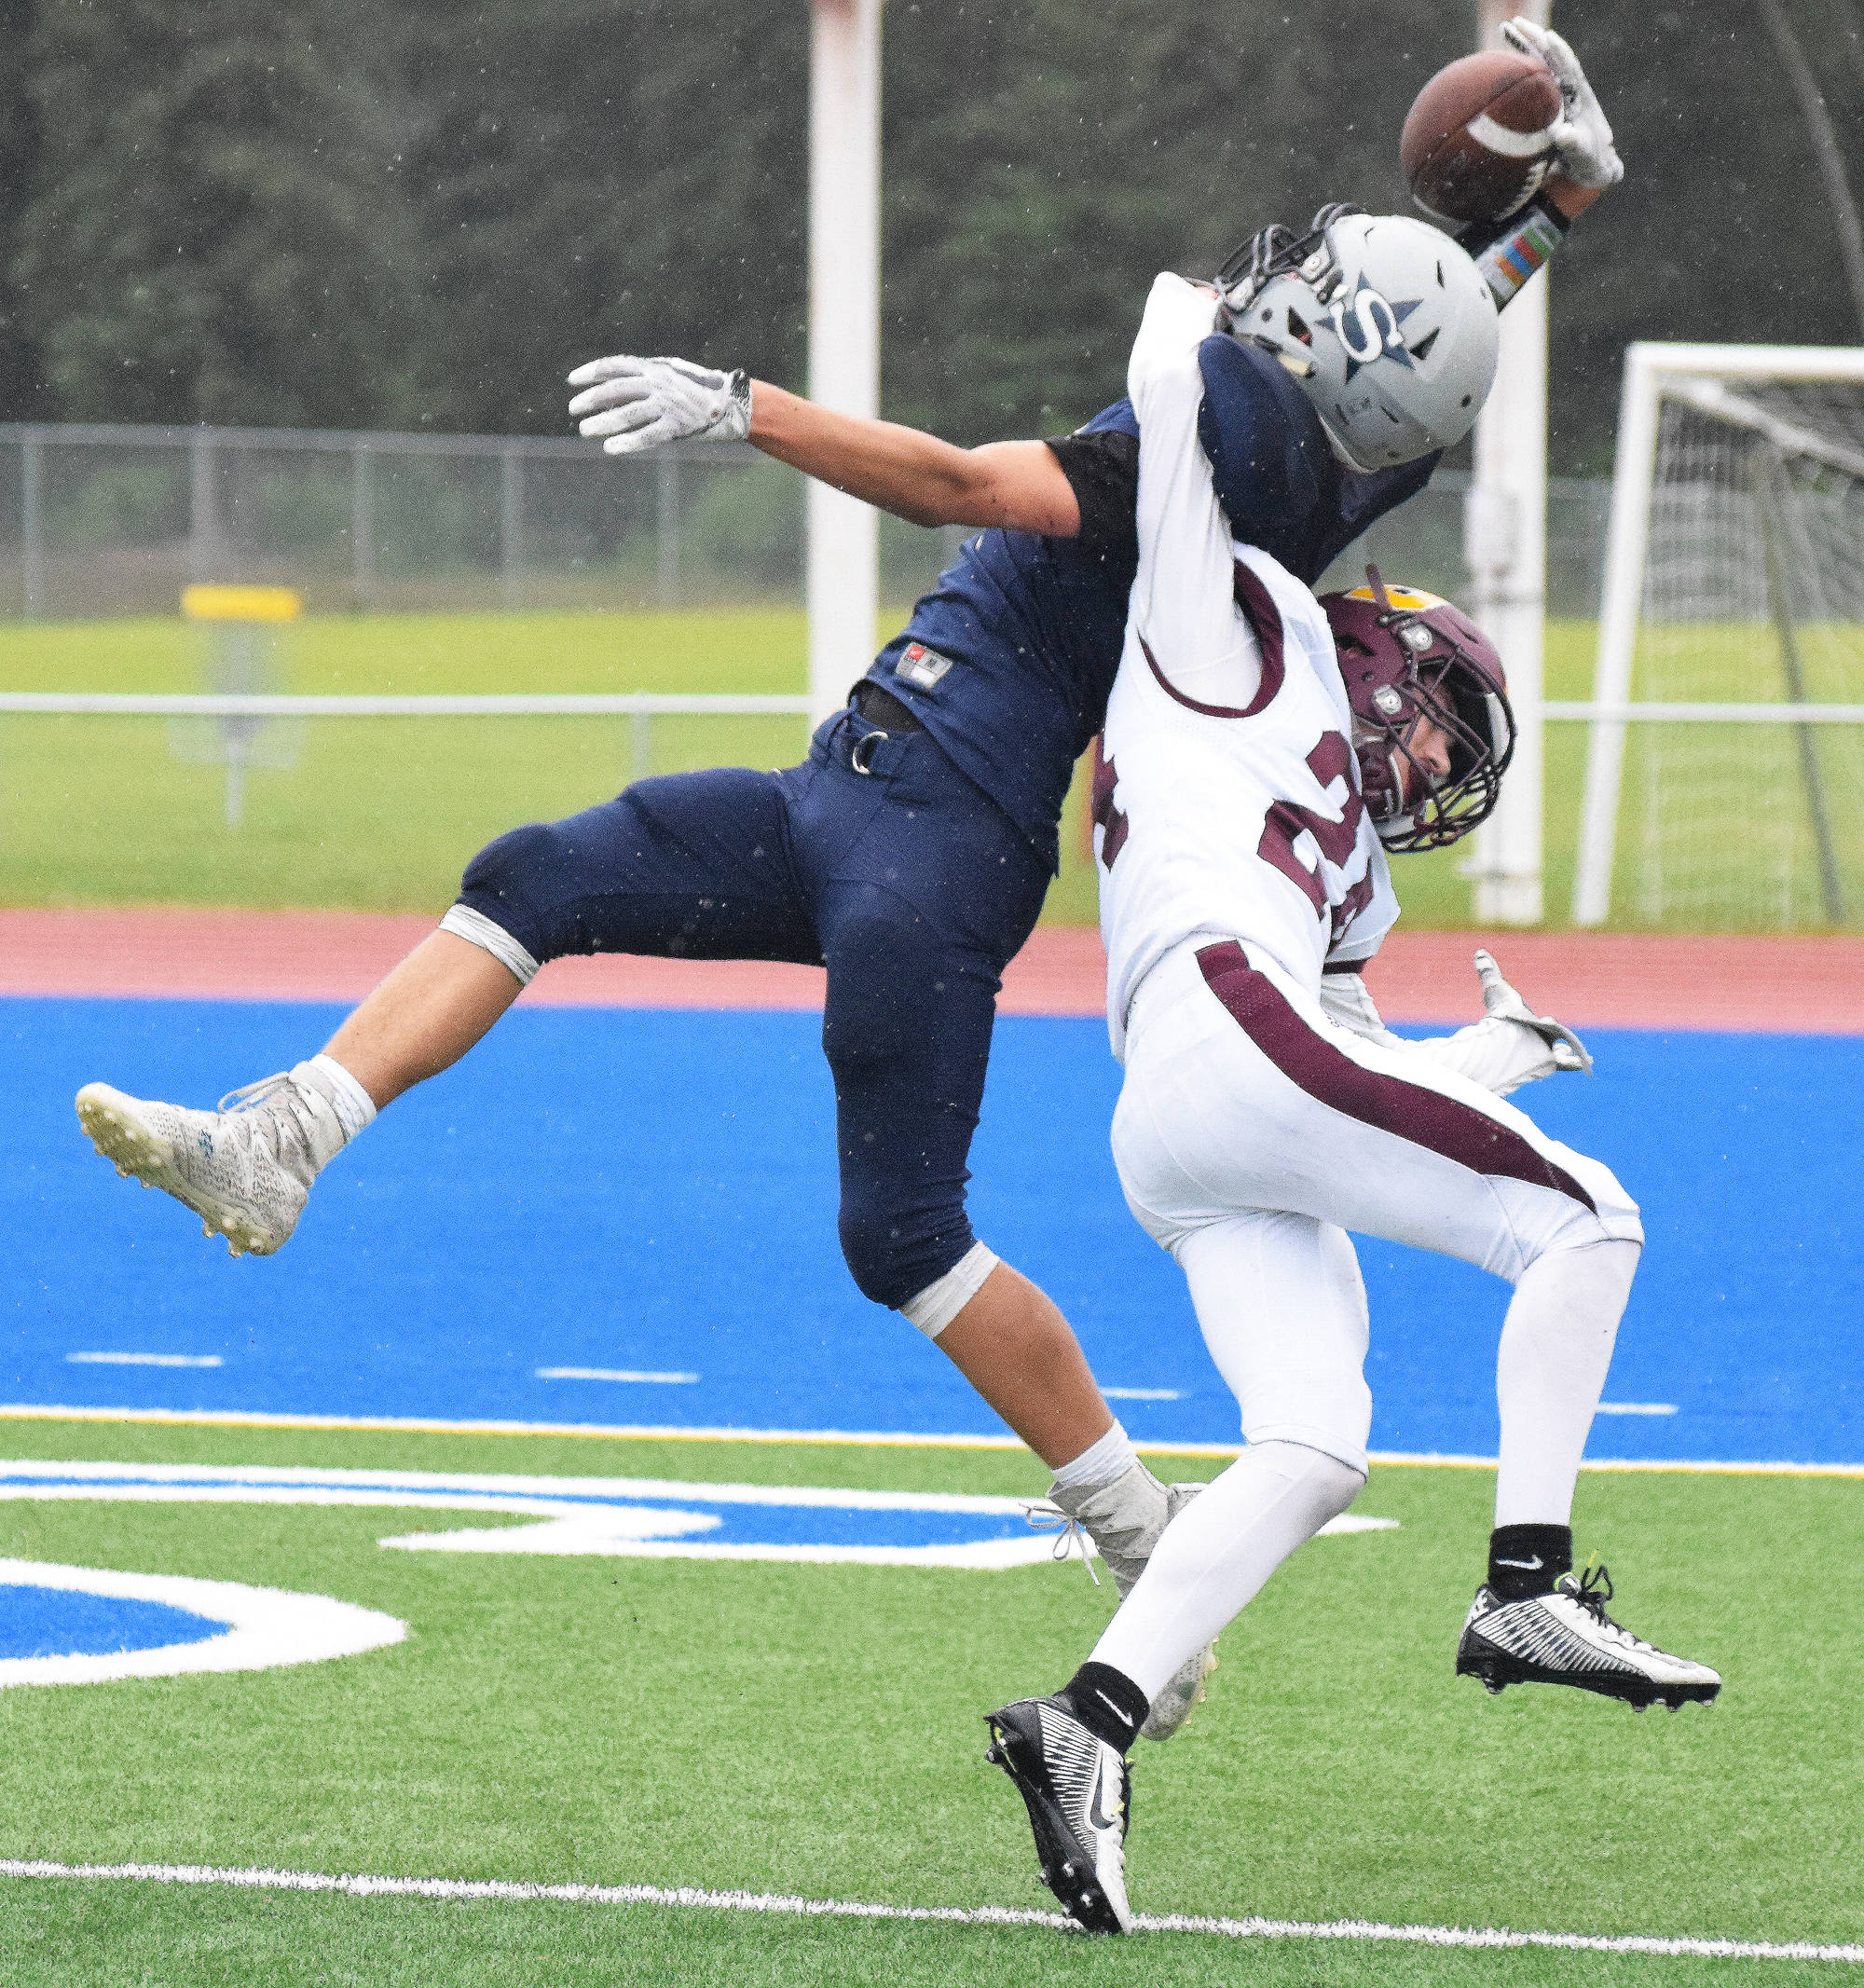 Soldotna cornerback Cy Updike nearly hauls in an interception above Dimond receiver R.J. Cavazos Friday night at Justin Maile Field in Soldotna. (Photo by Joey Klecka/Peninsula Clarion)